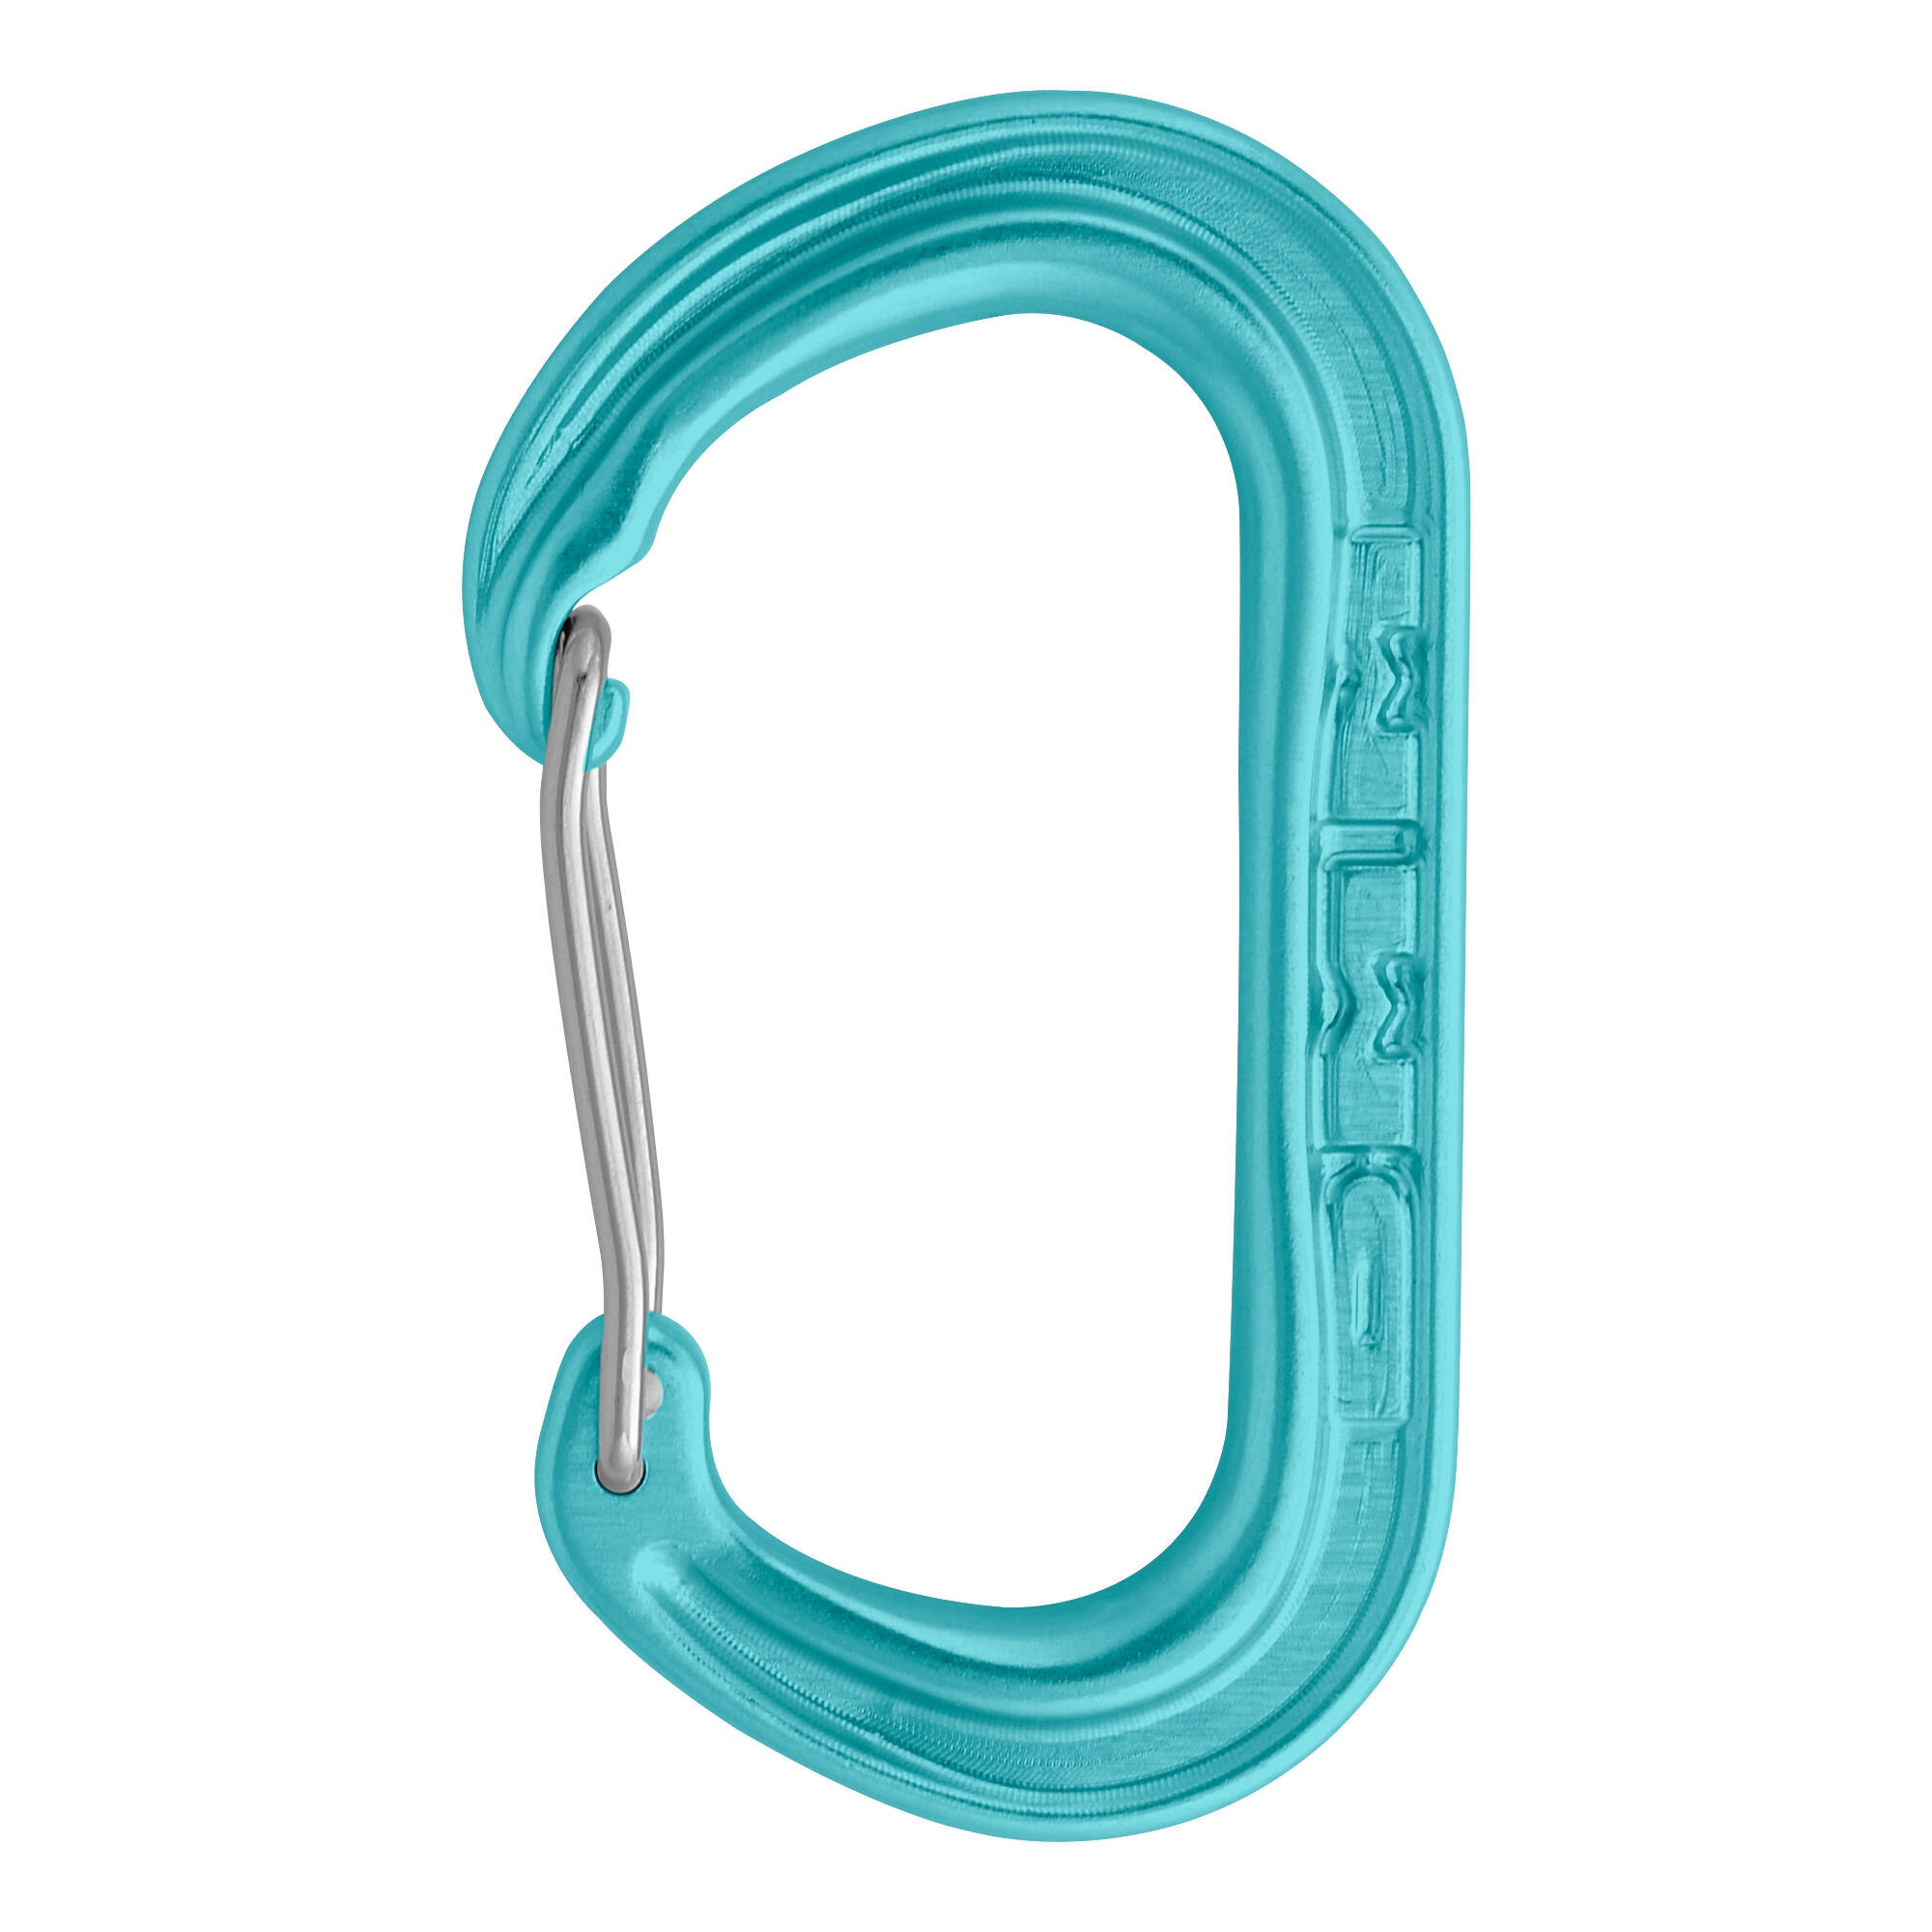 XSRE Wire Accessory Carabiner - Turquoise 1/1